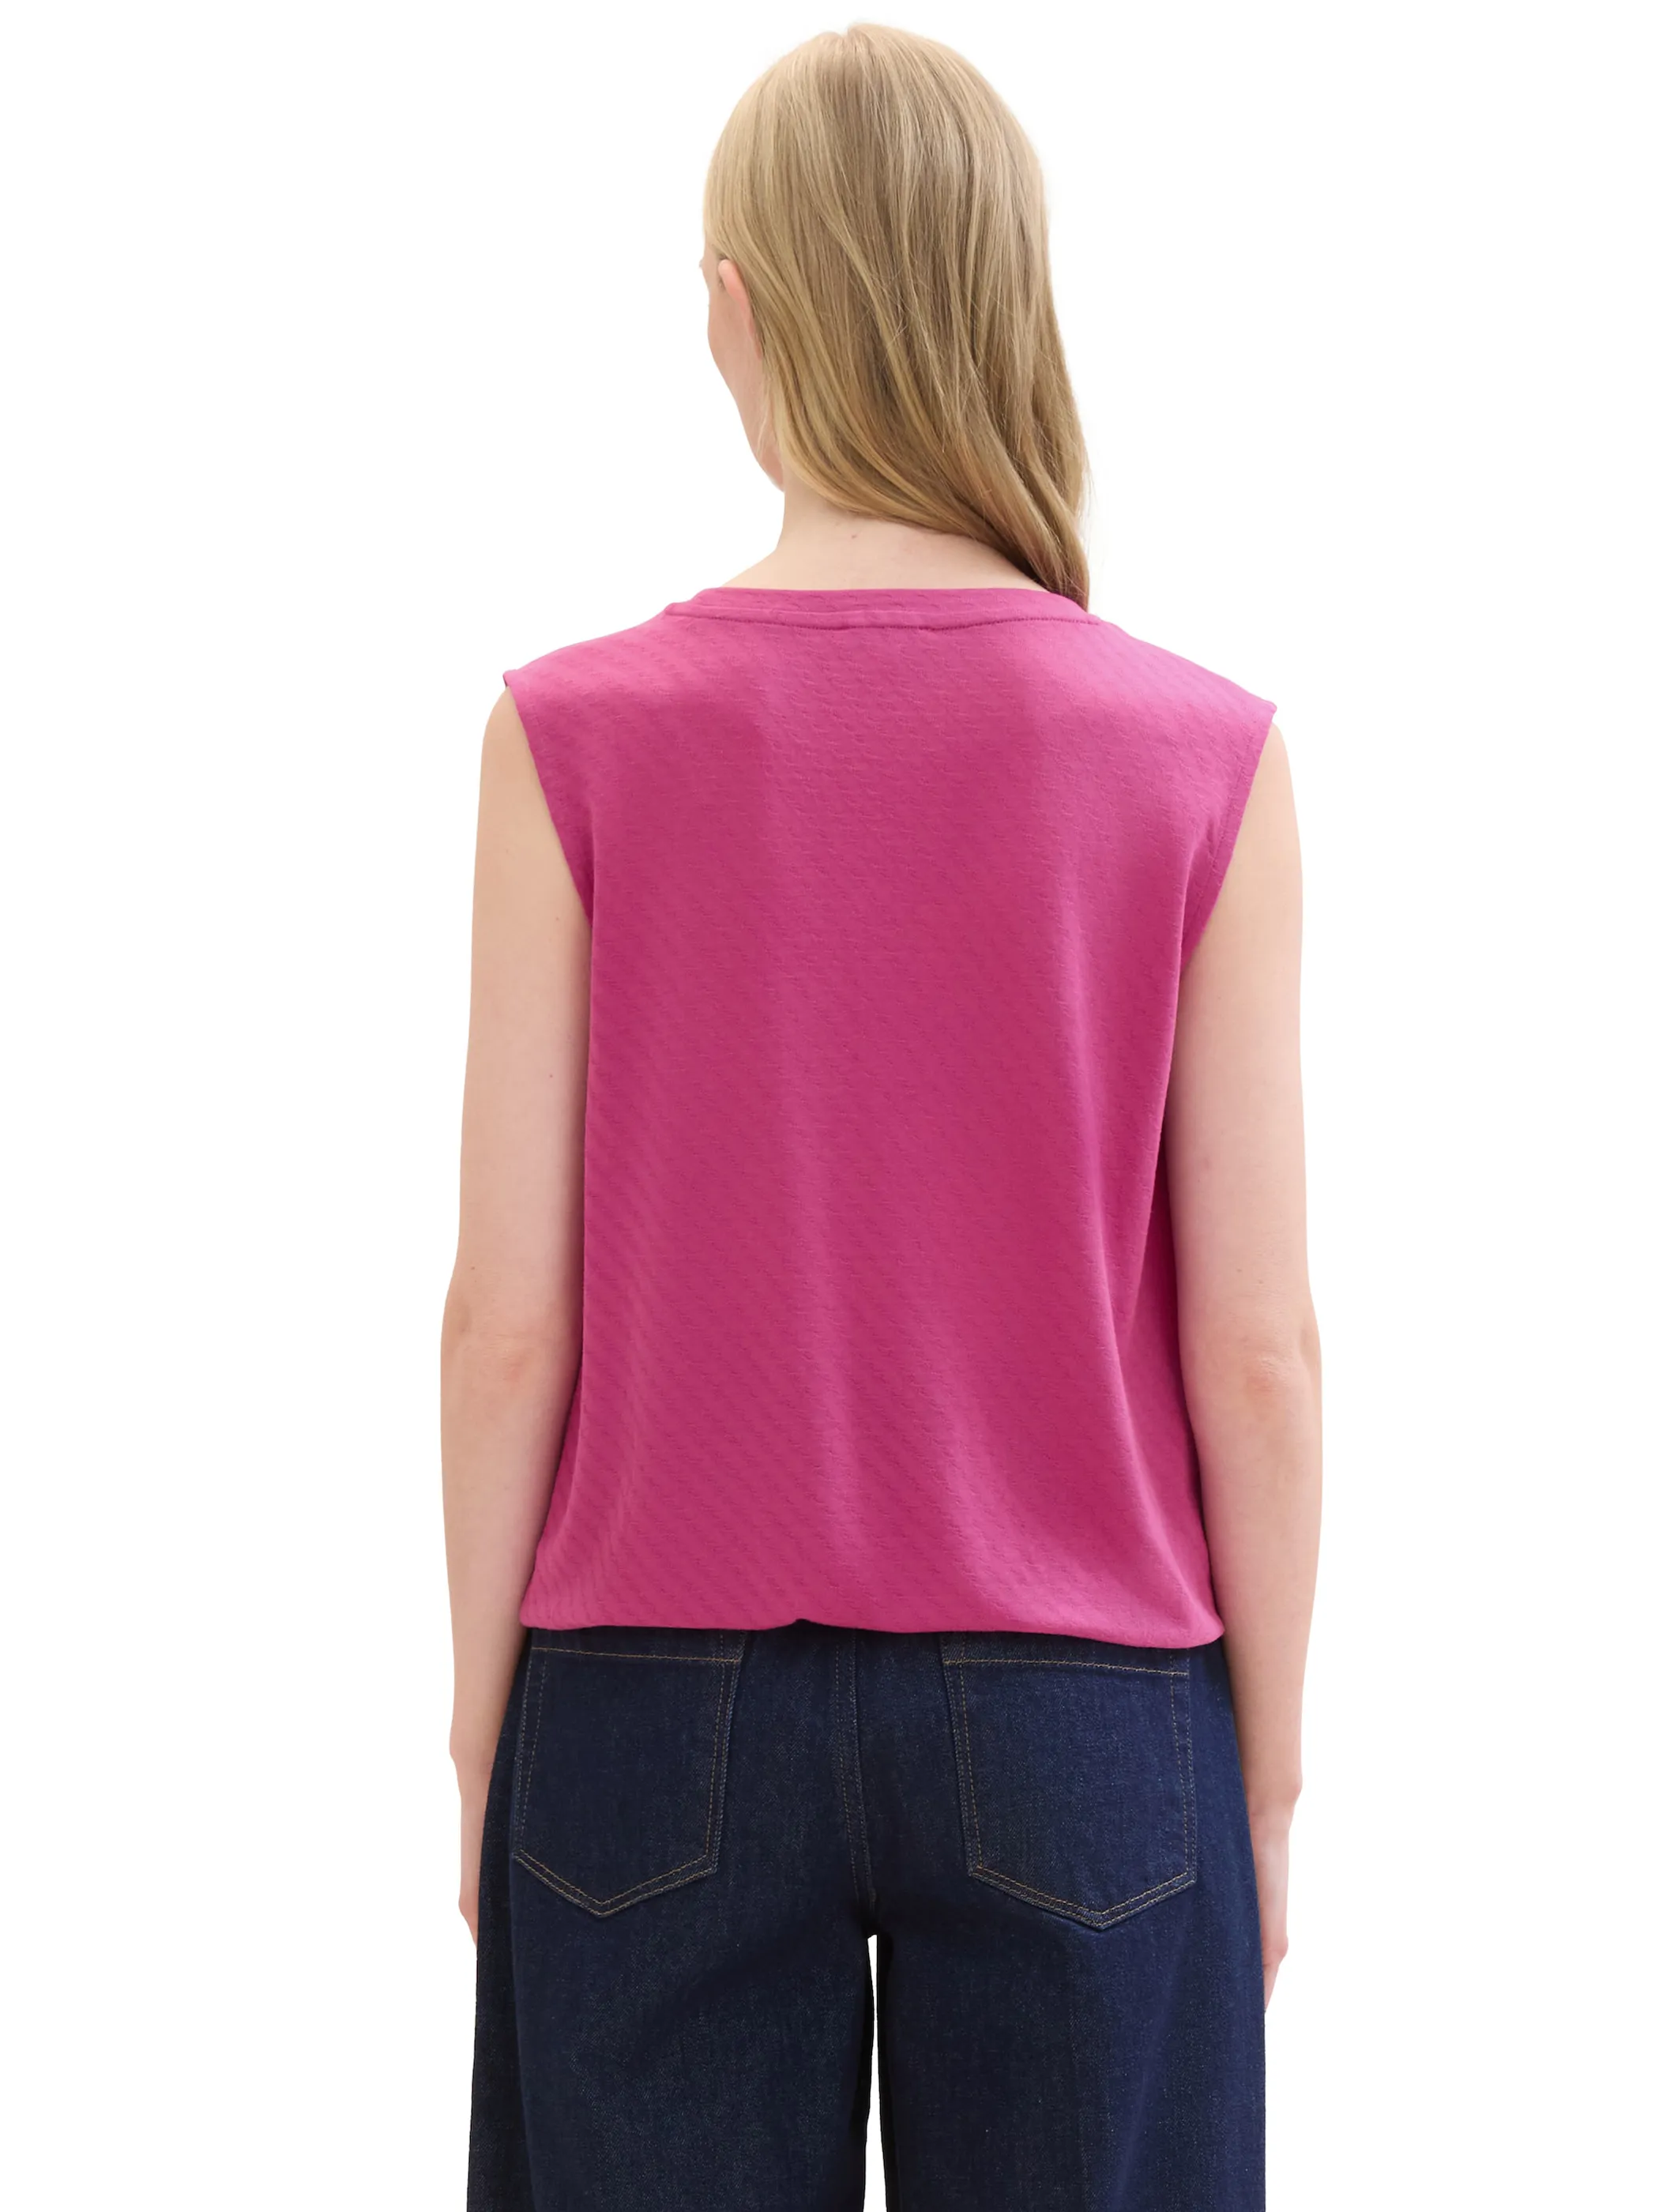 Tom Tailor 1041576 T-shirt top structured Pink 895791 35275 2